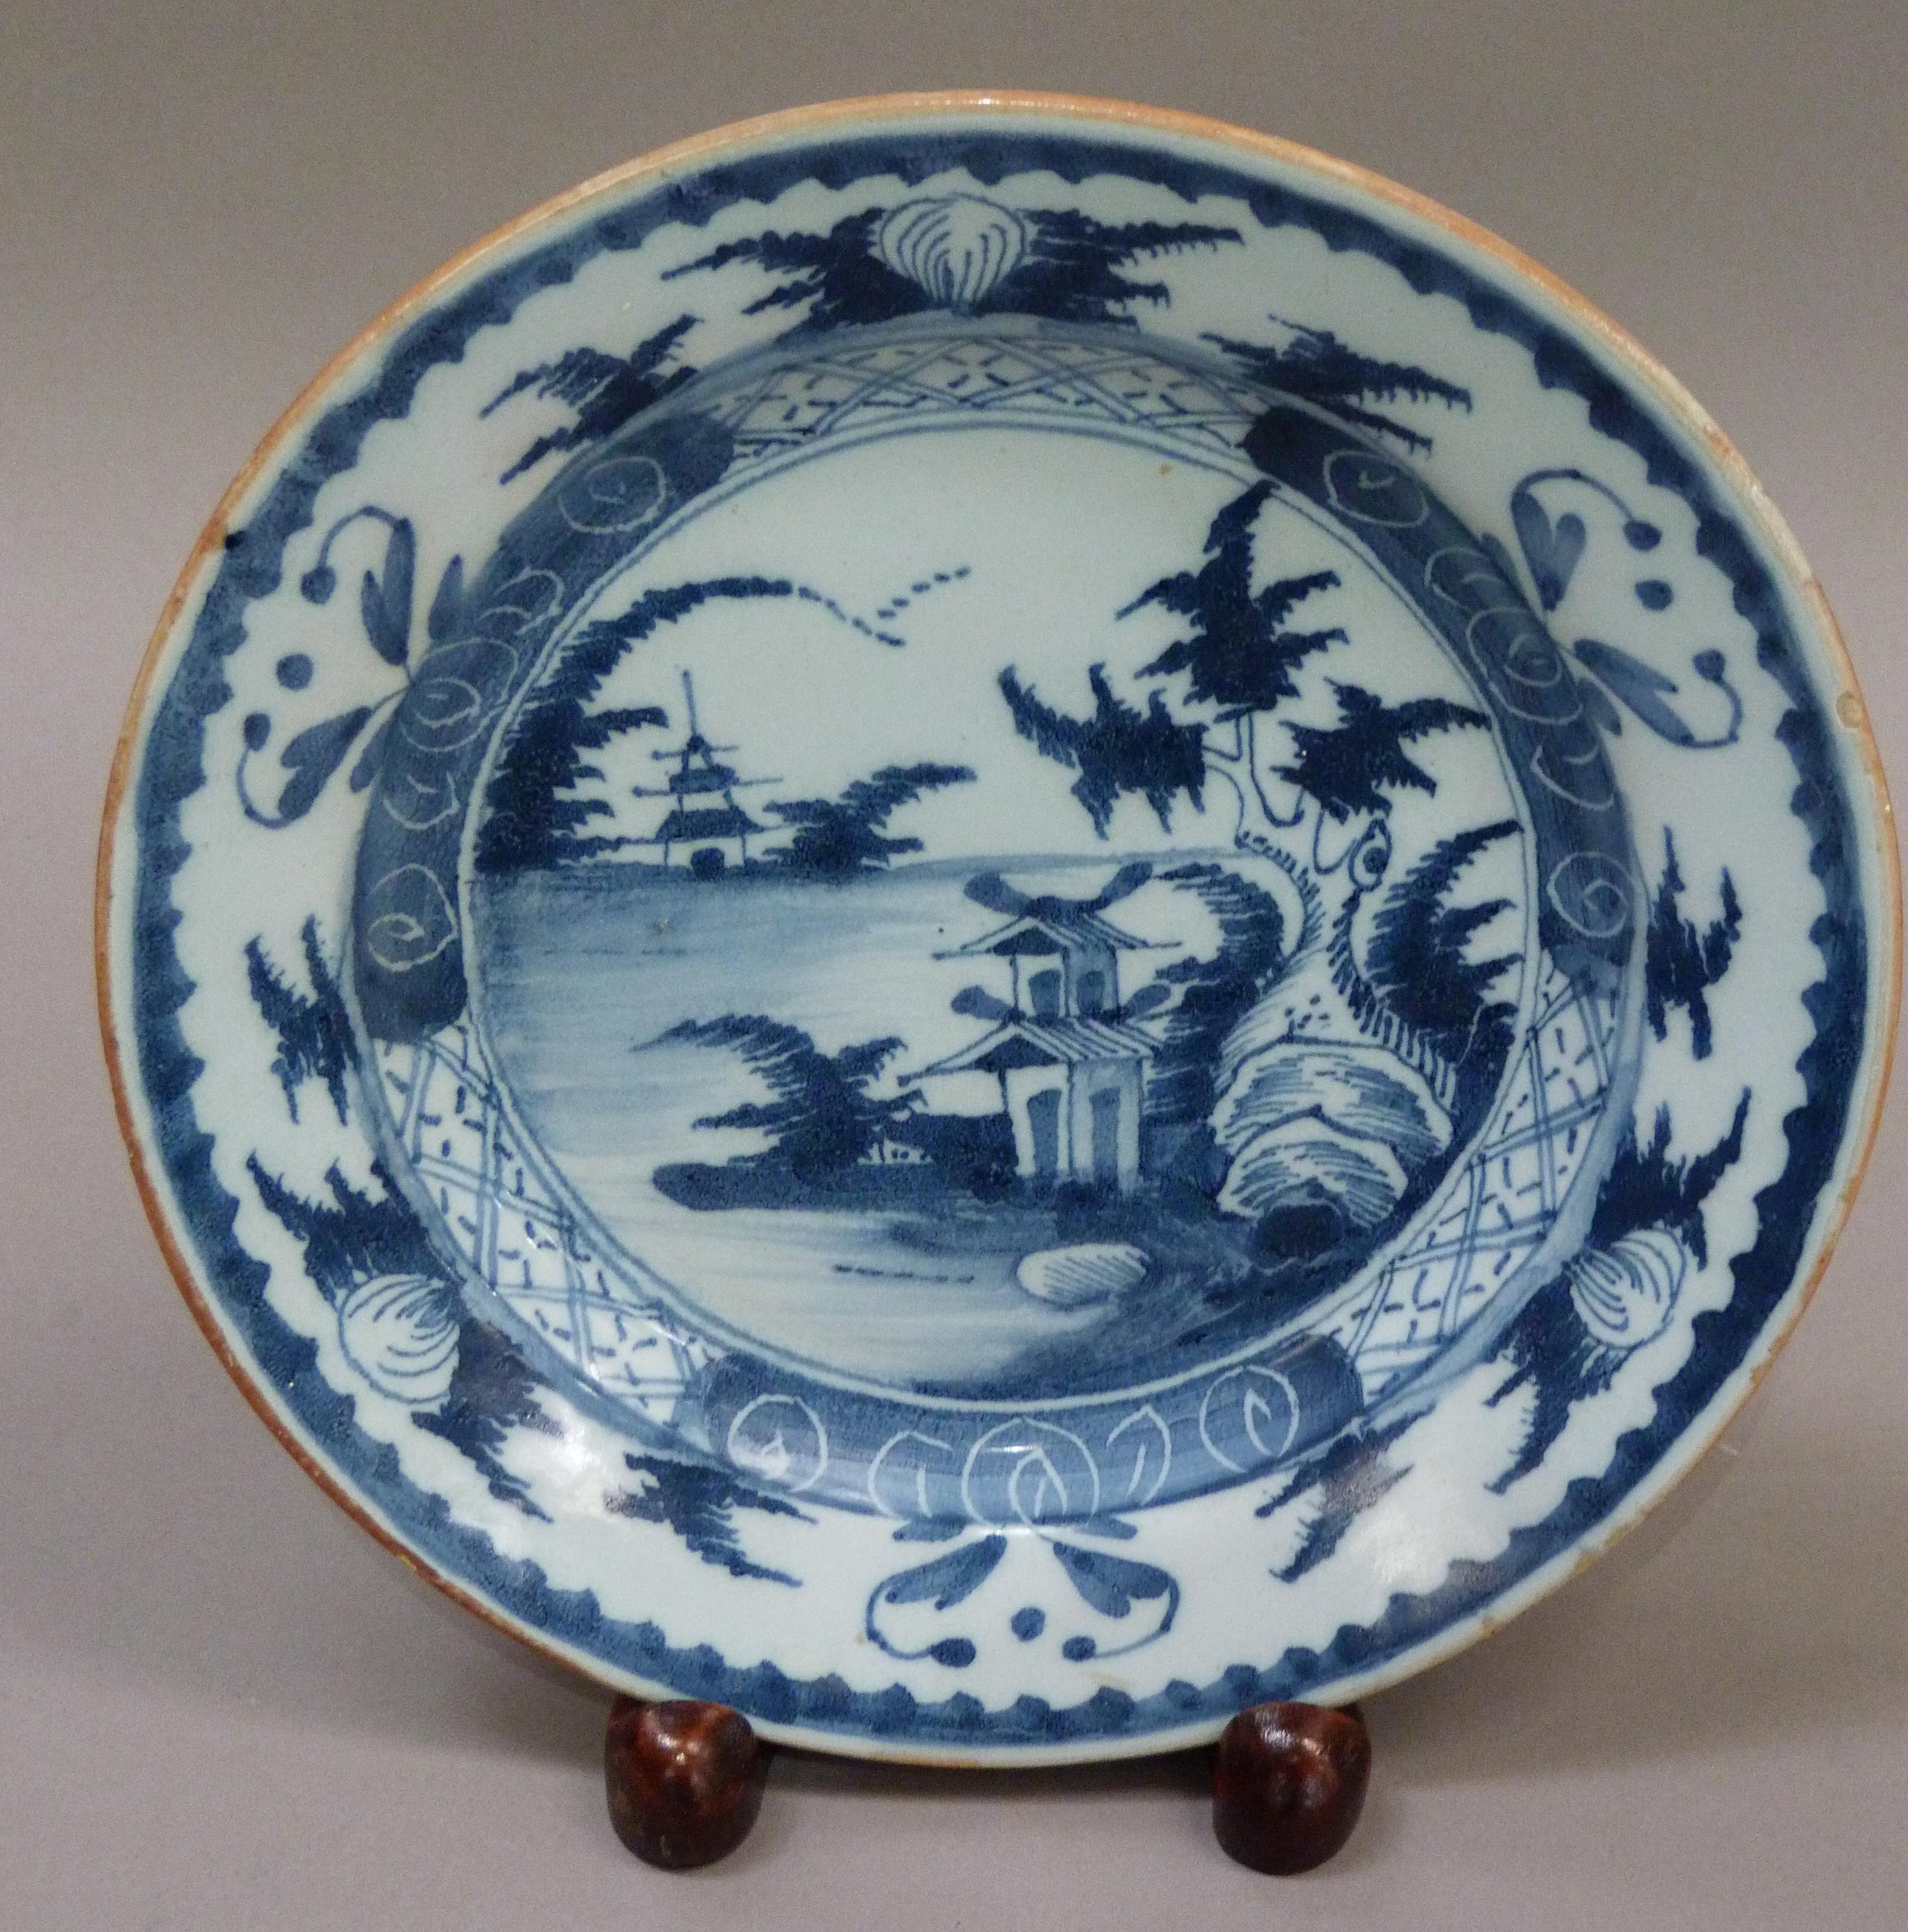 An 18th century delft plate painted in blue and white with a pagoda island river landscape, 23cm